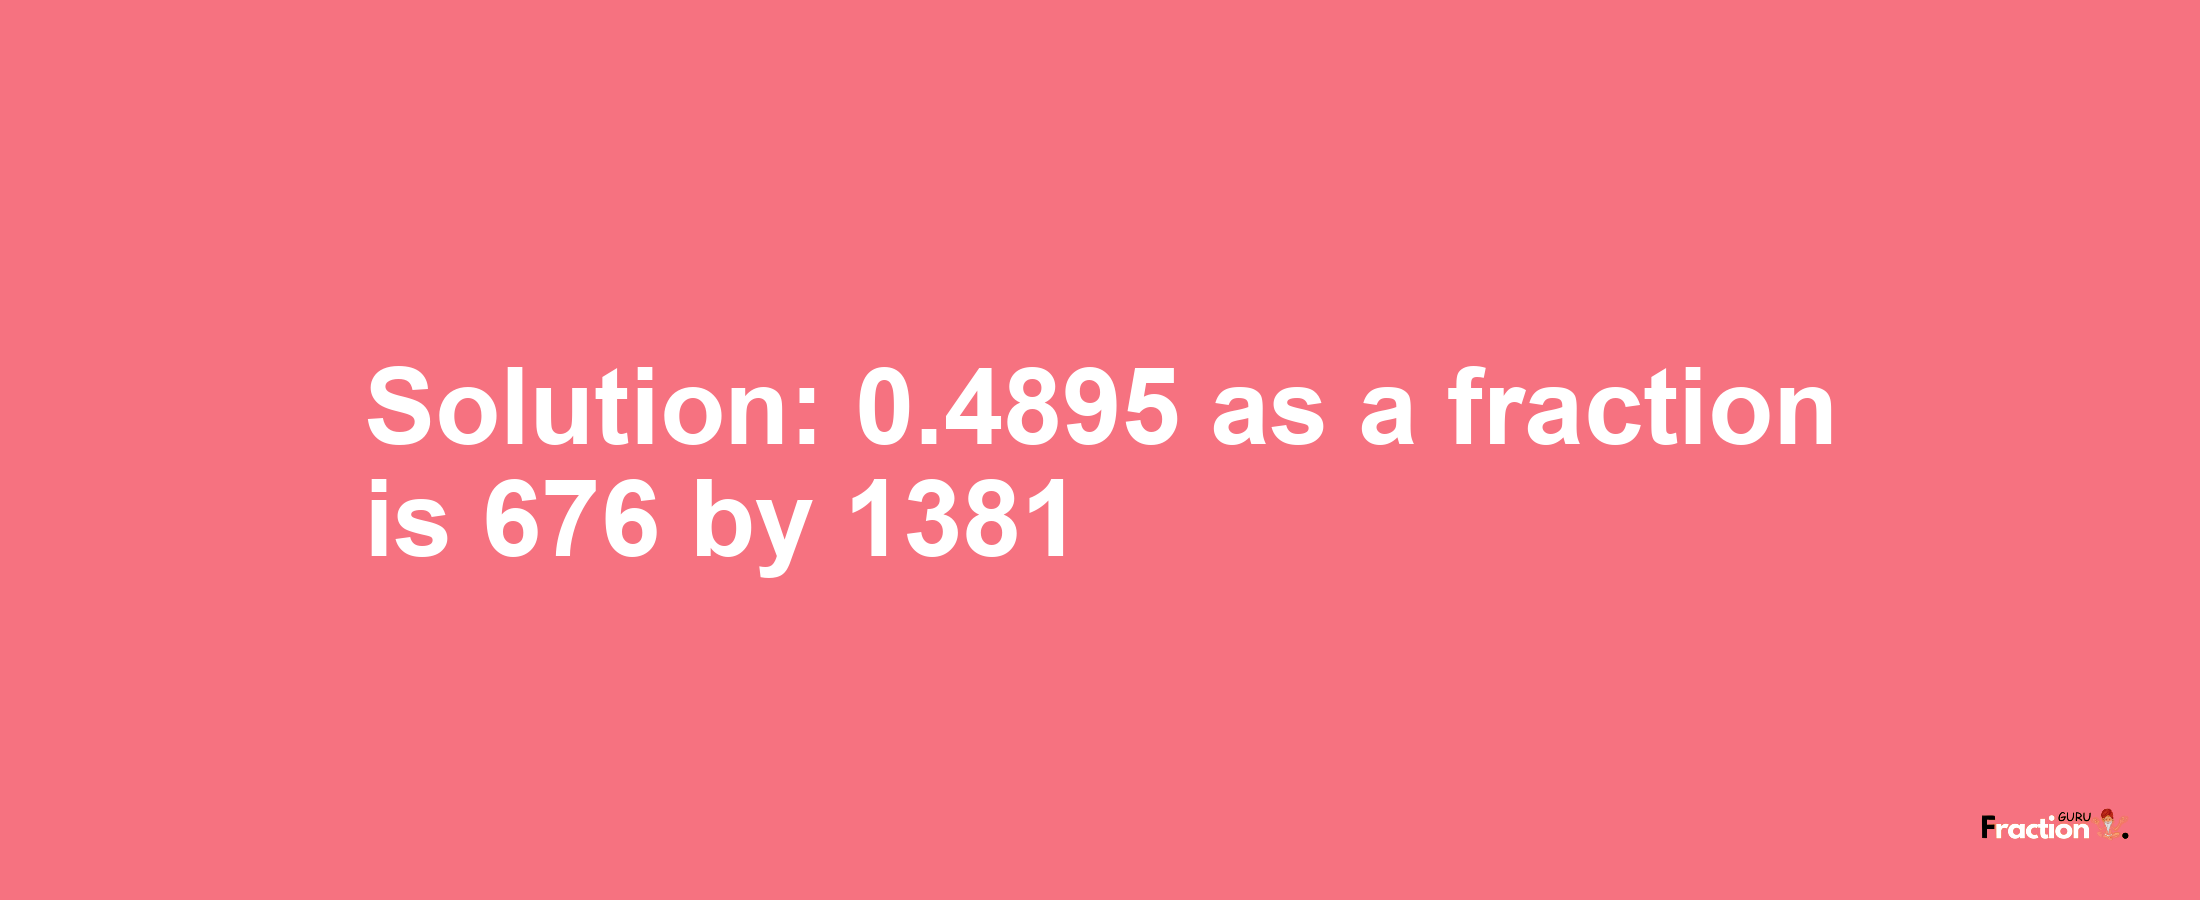 Solution:0.4895 as a fraction is 676/1381